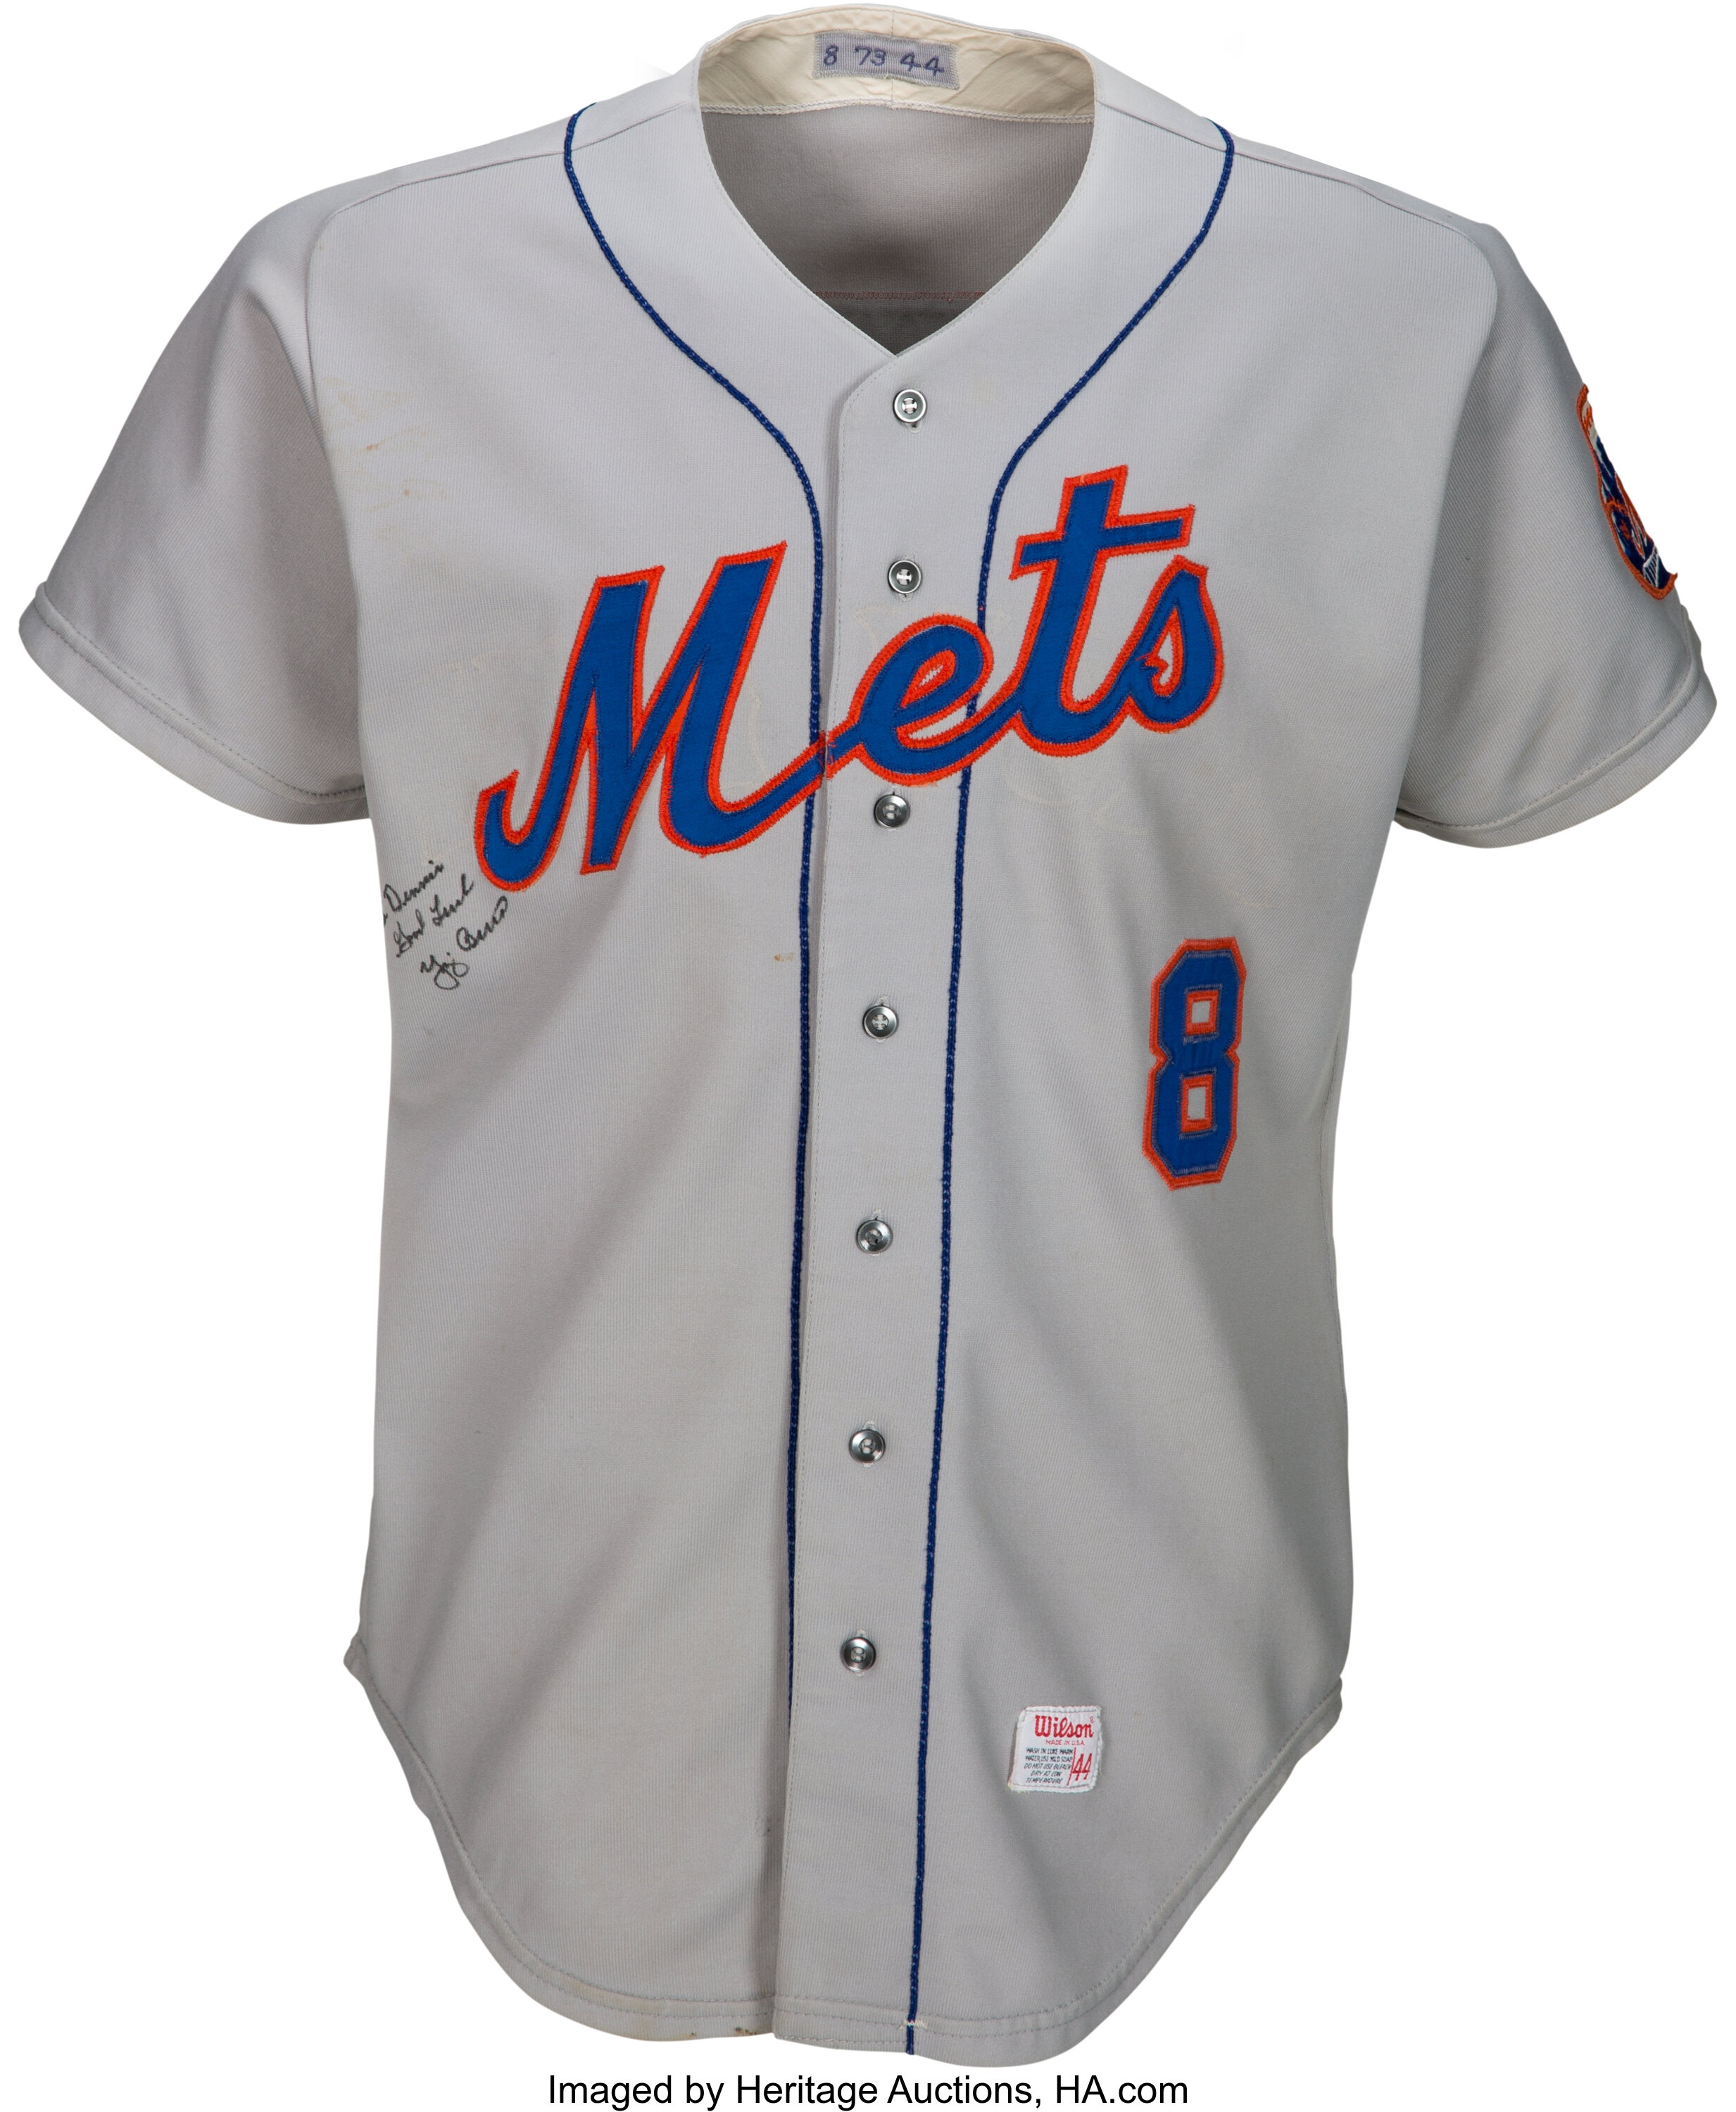 Baseball is back! Get your New York Mets jerseys before the